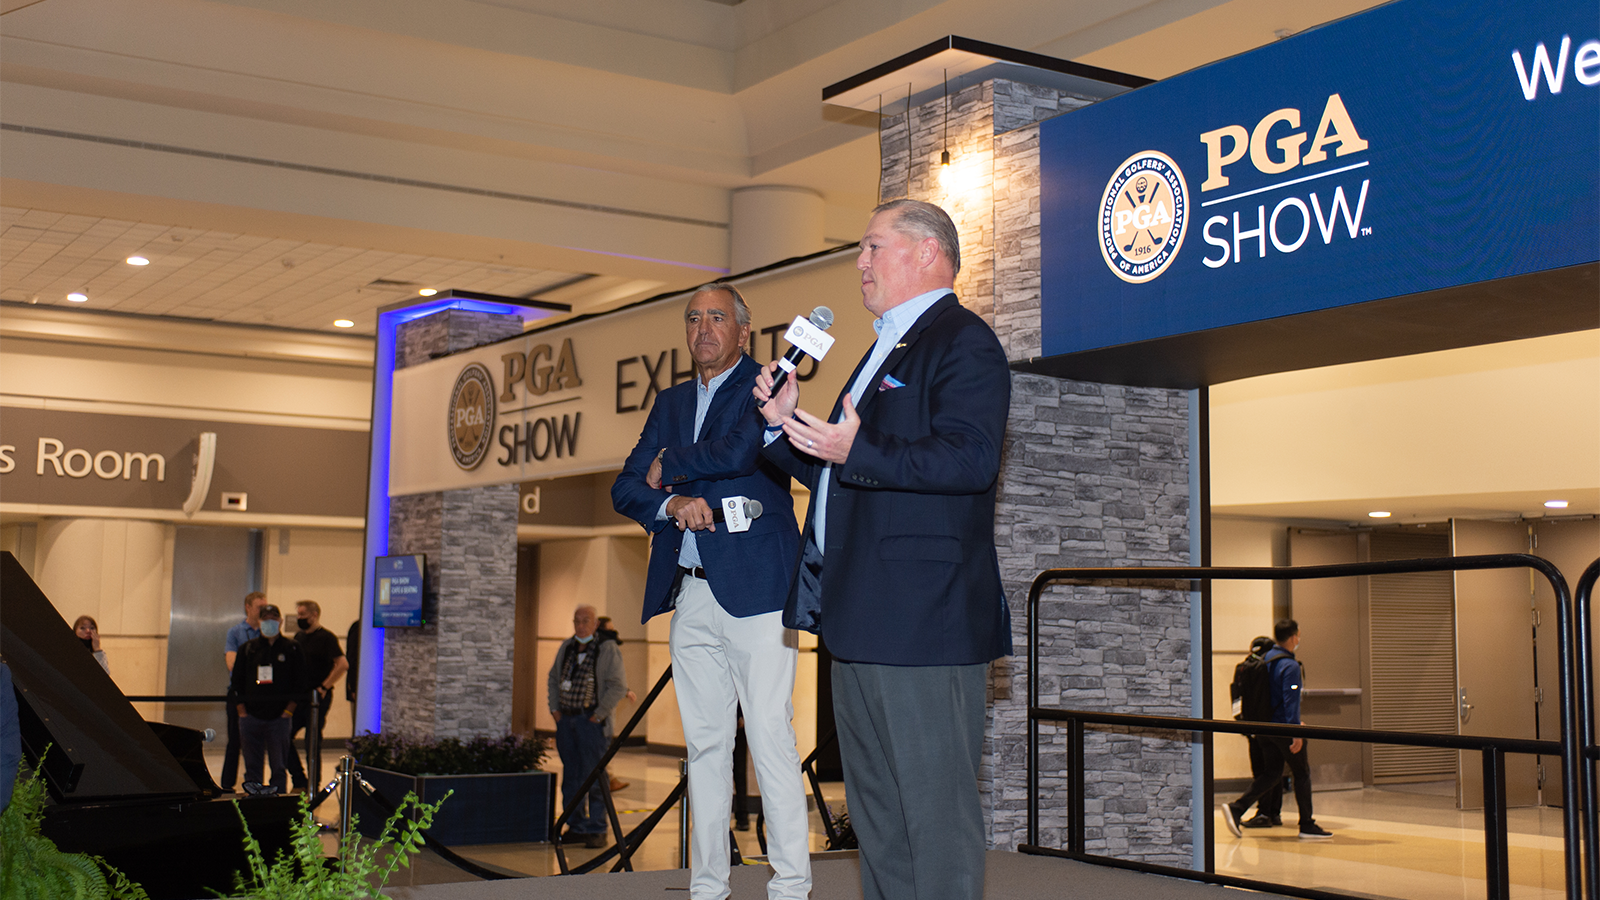 PGA of America President, Jim Richerson and PGA of America CEO, Seth Waugh during the Opening Ceremonies for the 2022 PGA Show at the Orange County Convention Center on January 26, 2022 in Orlando, FL. (Photo by Montana Pritchard/PGA of America)